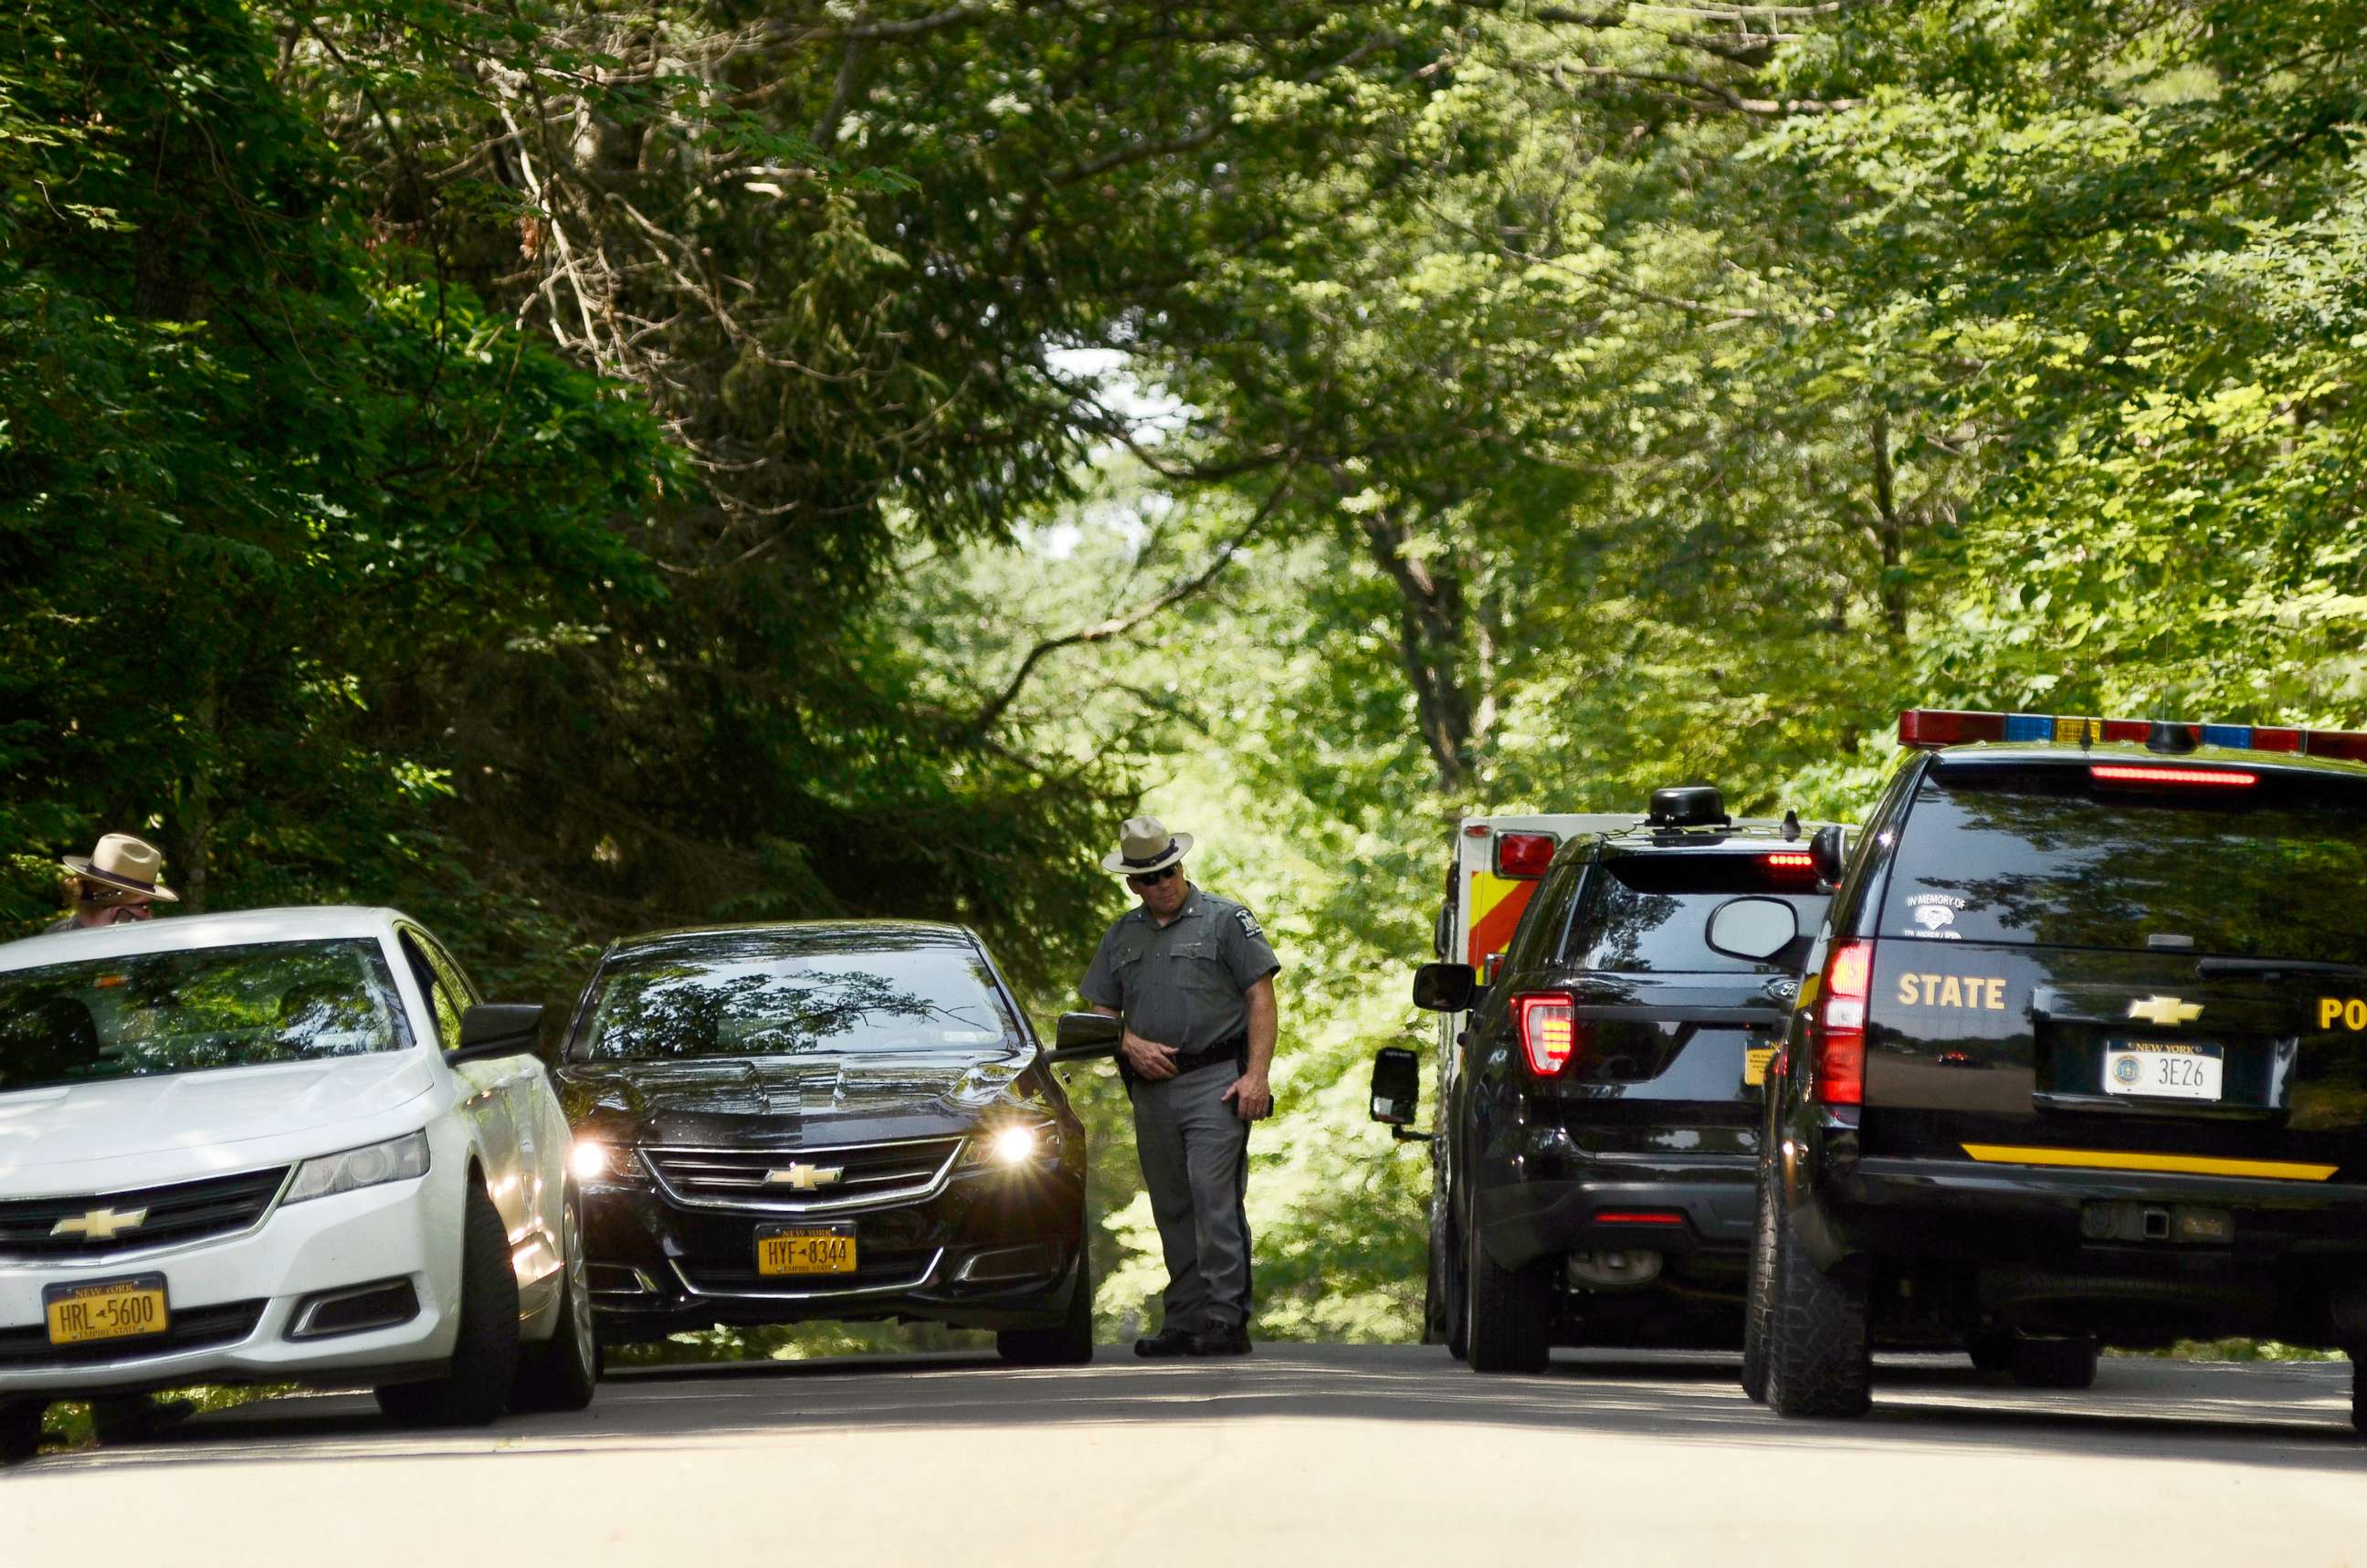 PHOTO: New York State Police block the entrance of Welch Road in Corning, N.Y., July 2, 2018, as they investigate the scene of a shooting near SUNY Corning Community College.